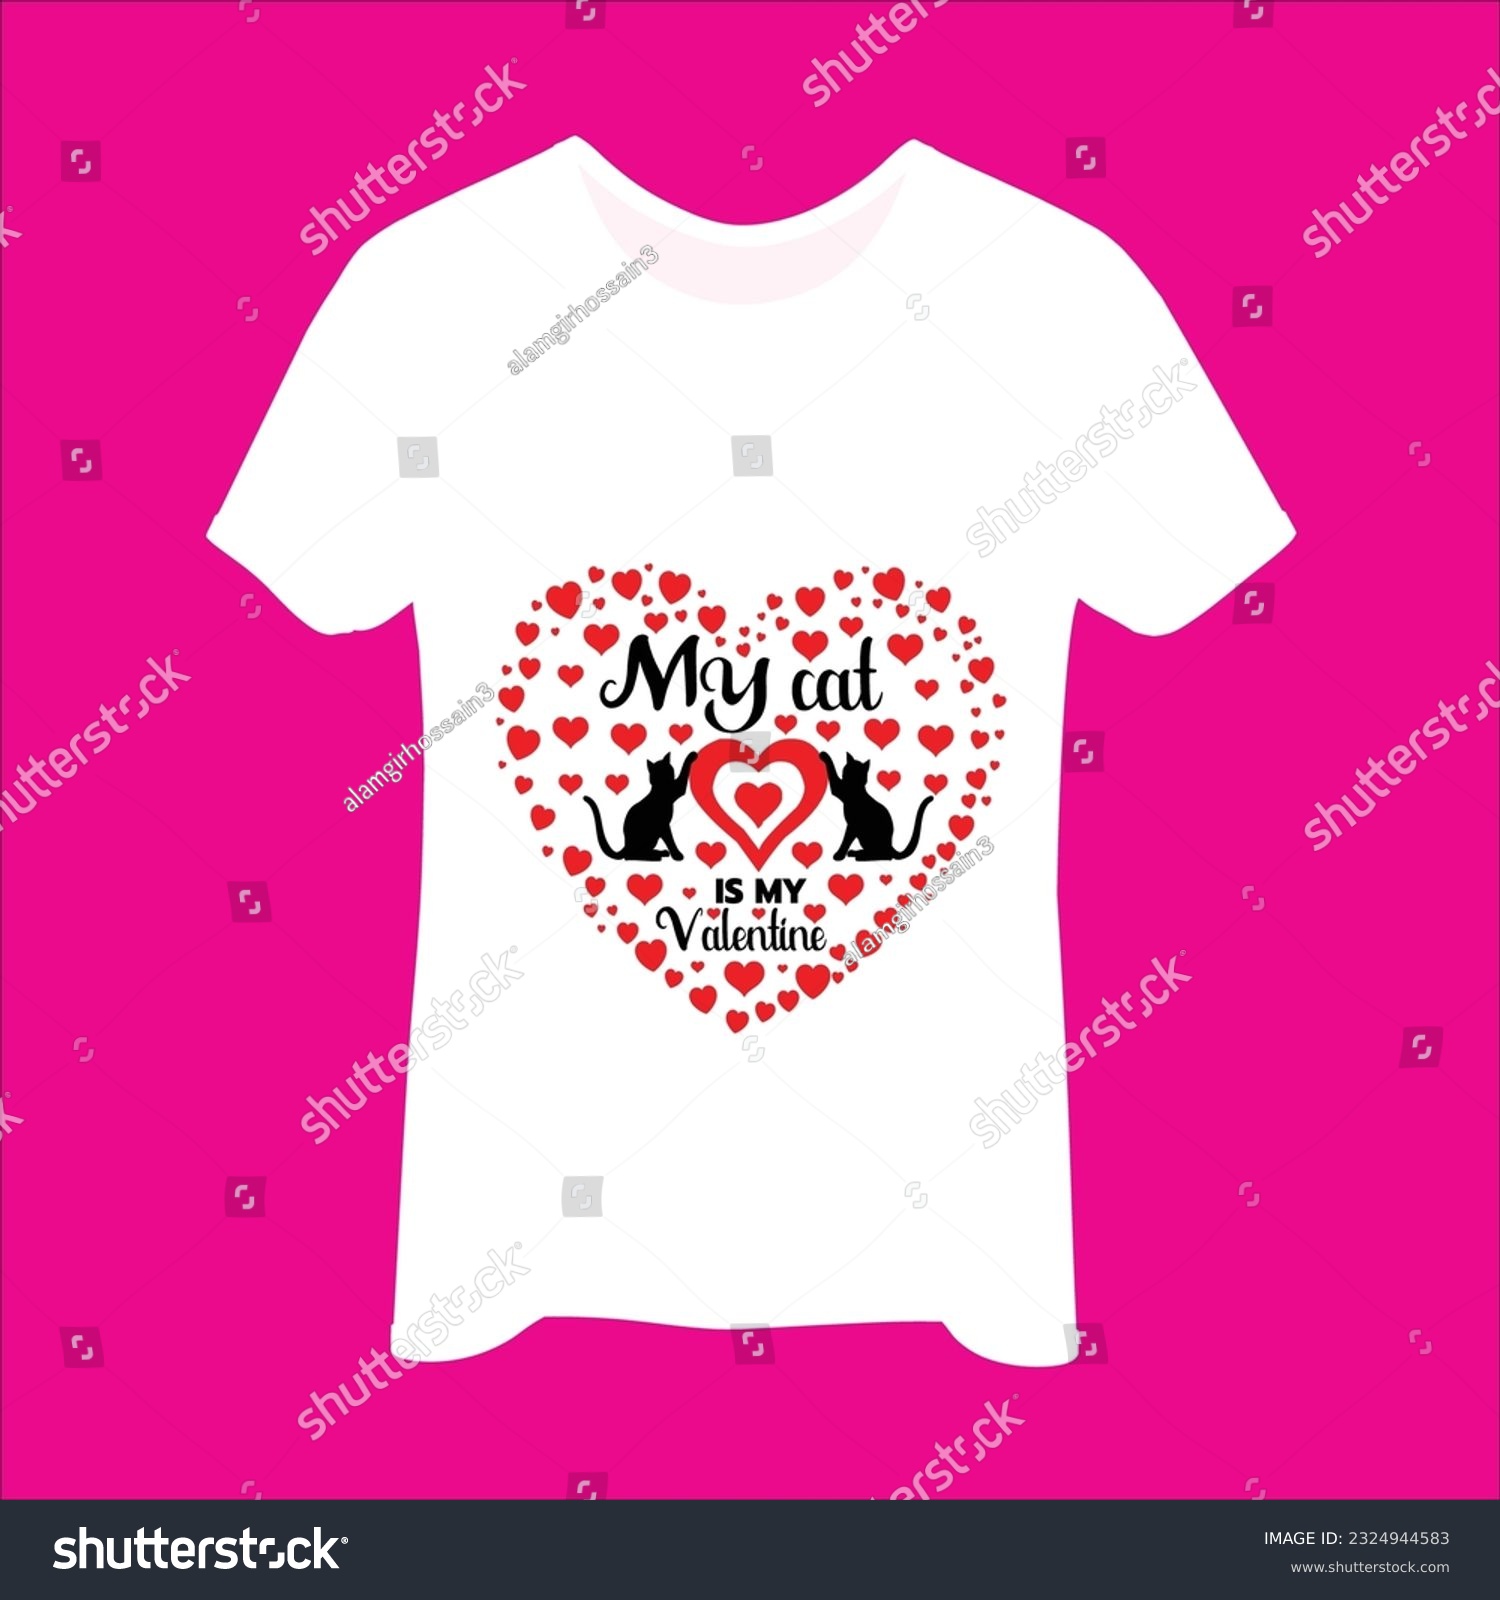 SVG of My cat is my valentine 3 t-shirt design. Here You Can find and Buy t-Shirt Design. Digital Files for yourself, friends and family, or anyone who supports your Special Day and Occasions. svg